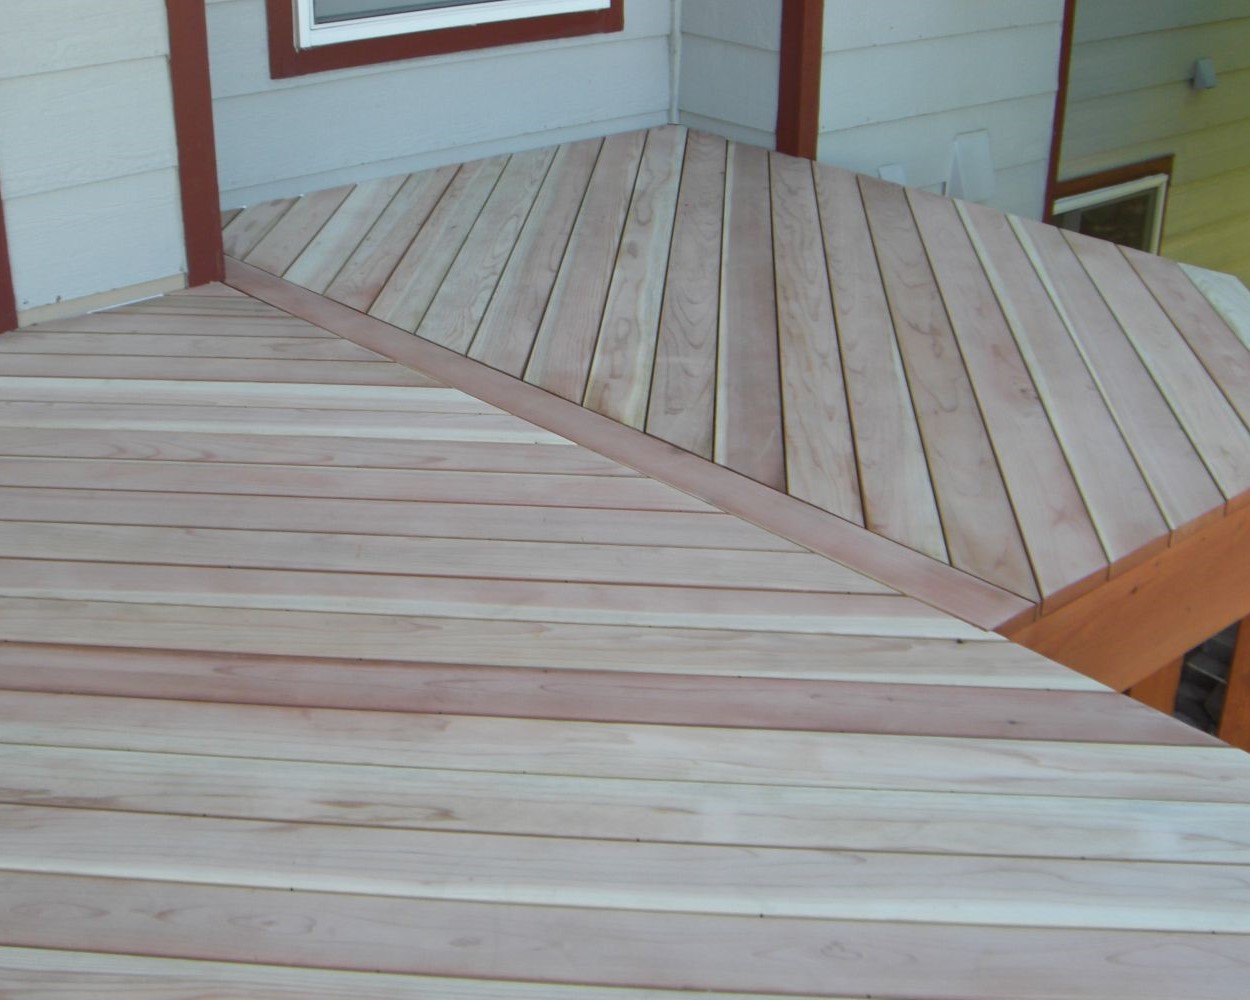 A B-grade Redwood deck in a herringbone pattern. The railing is not installed yet and the wood is unstained.